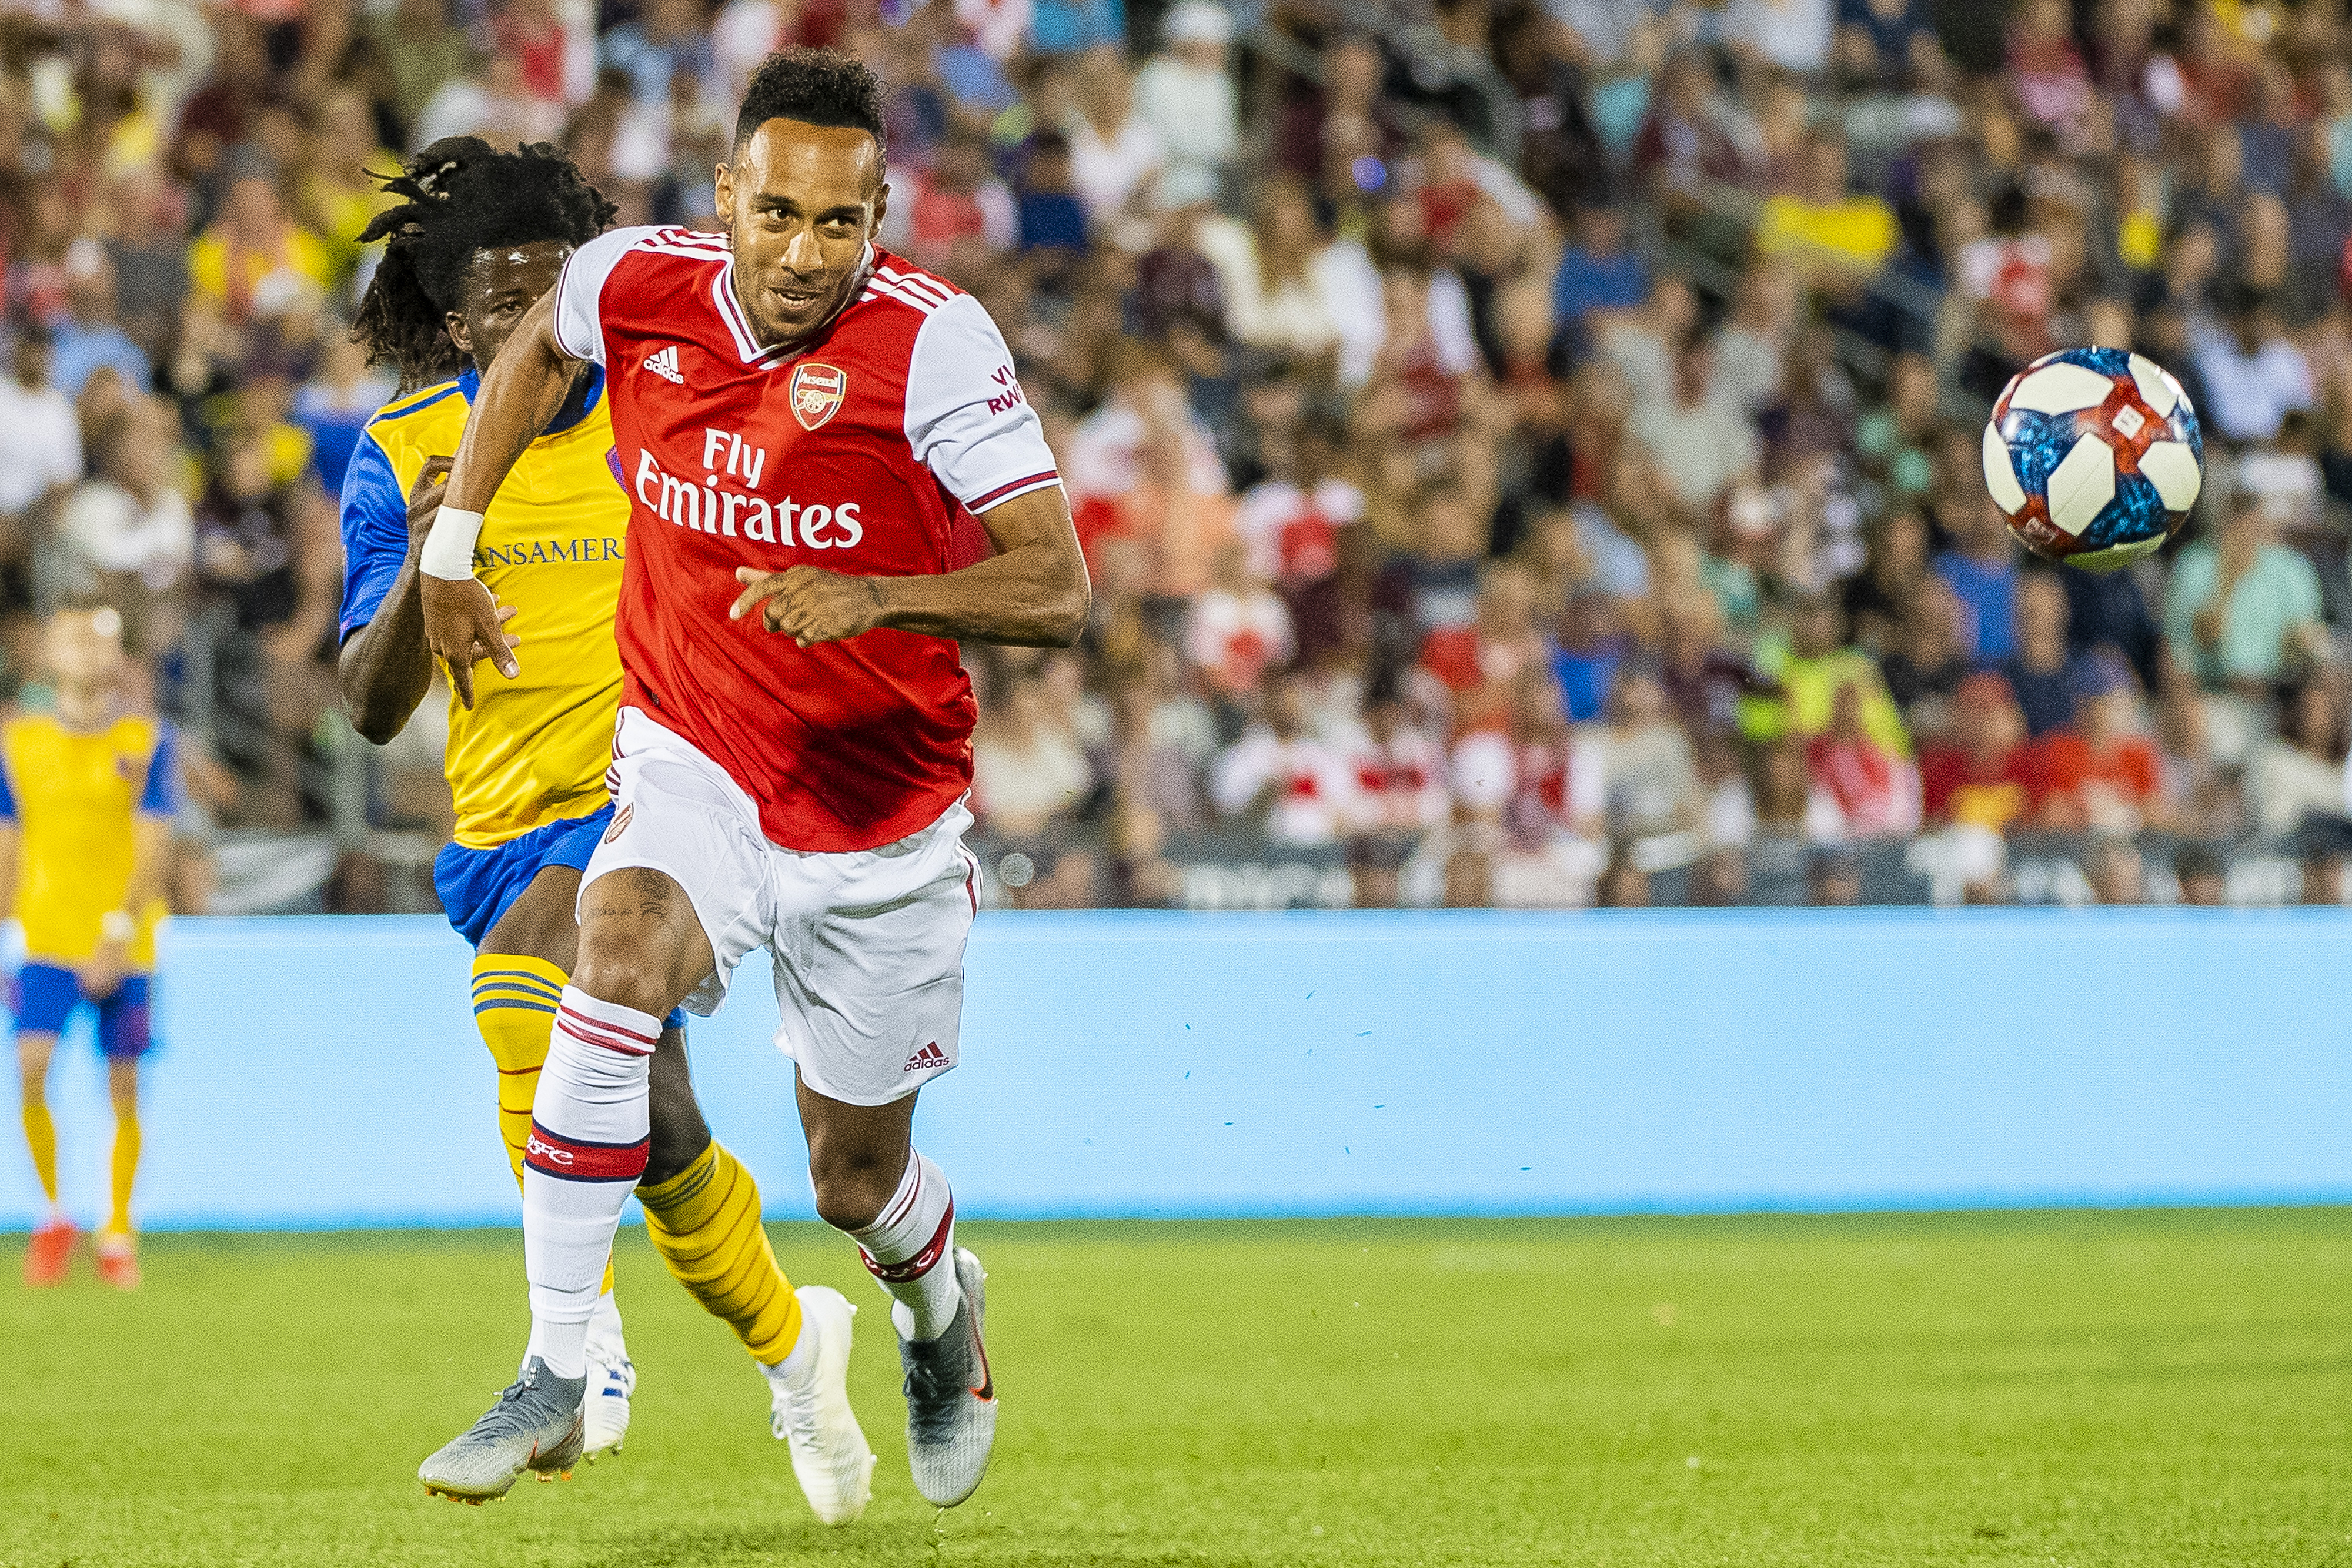 COMMERCE CITY, CO - JULY 15: Pierre-Emerick Aubameyang #14 of Arsenal chases a loose ball during the second half against the Colorado Rapids at Dick's Sporting Goods Park on July 15, 2019 in Commerce City, Colorado. (Photo by Timothy Nwachukwu/Getty Images)